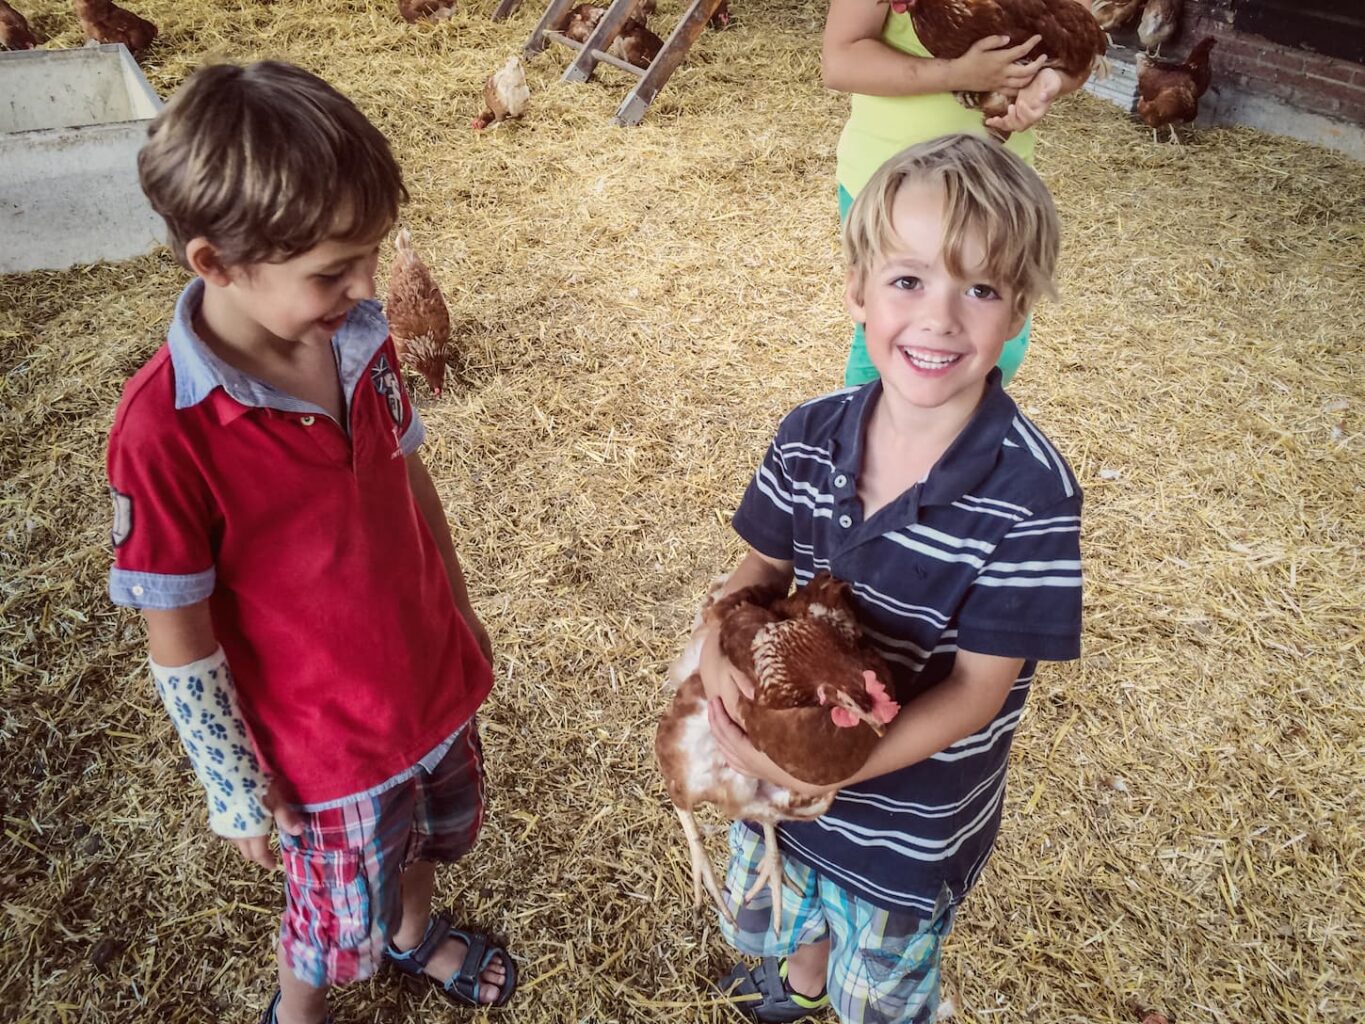 An image of a young boy holding a chicken in a barn while his twin brother watches him.